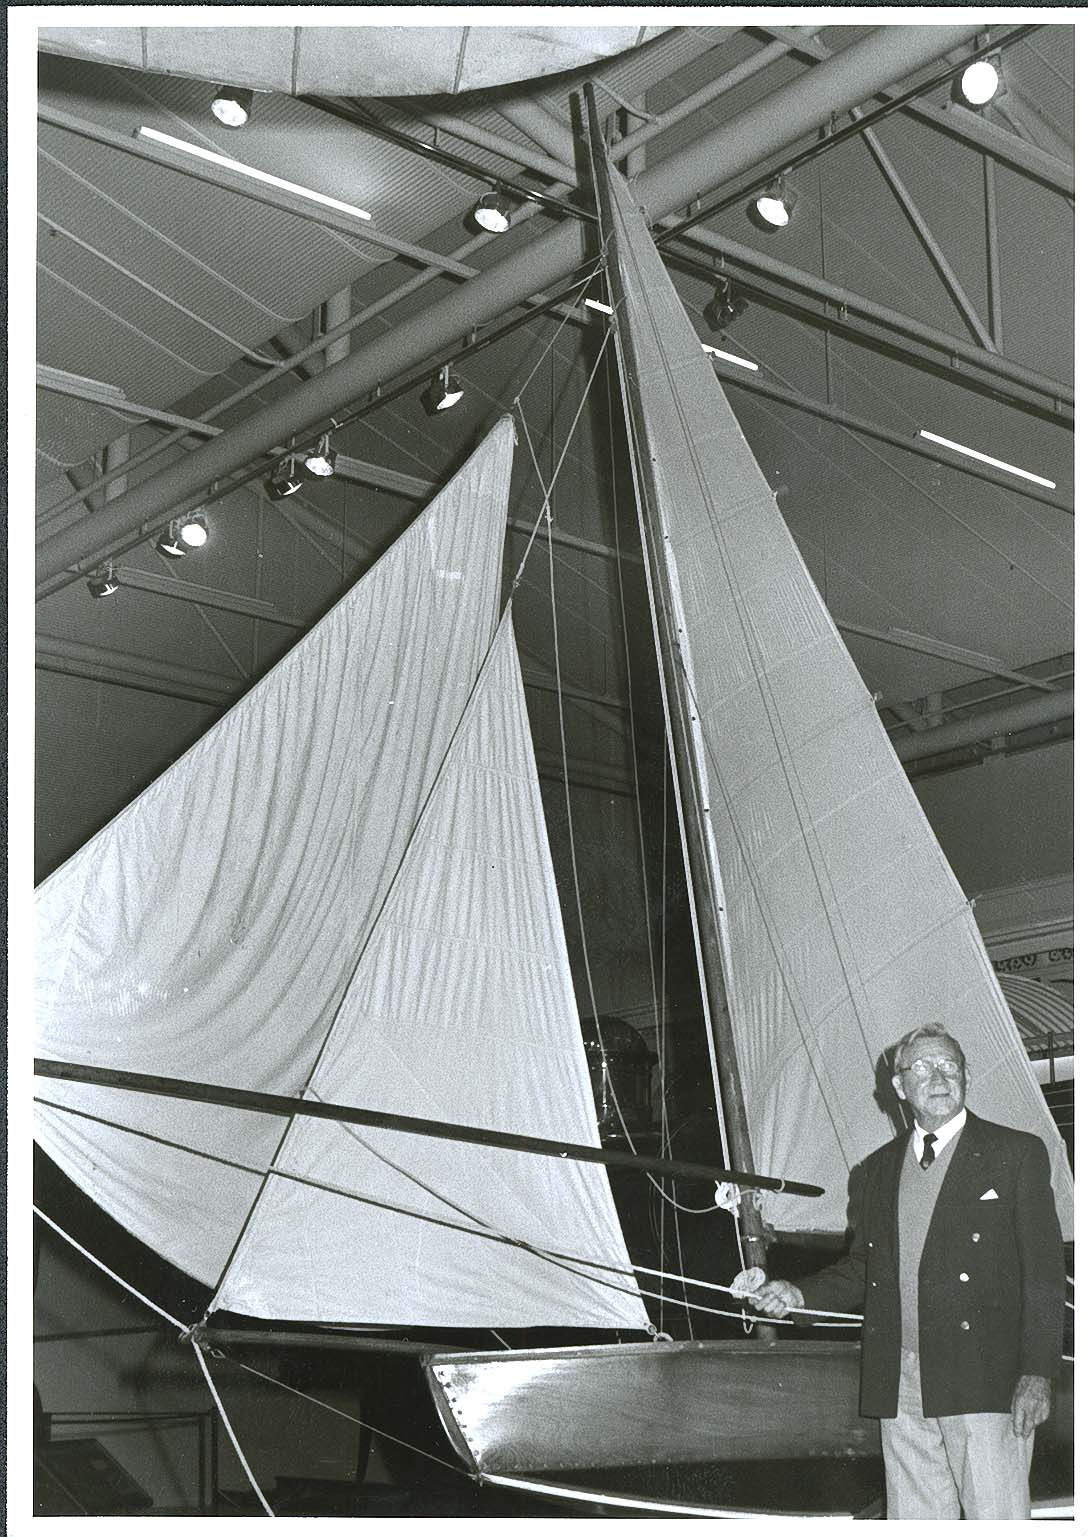 VJ sailing boat 'Giselle' designed by Charles Sparrow